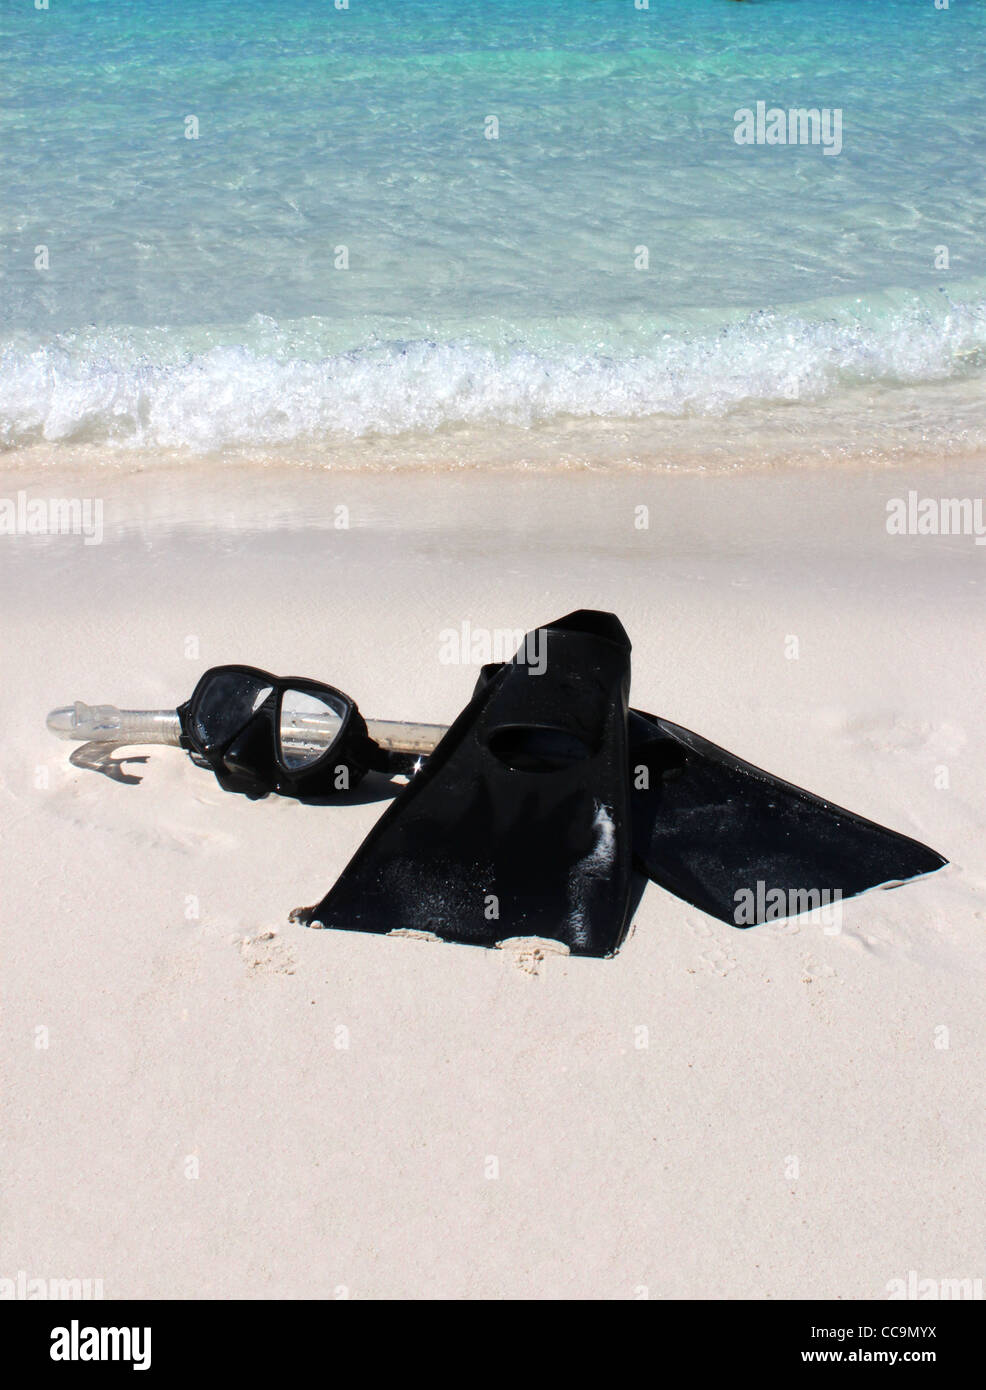 Snorkeling equipment on the sandy shore of a tropical beach Stock Photo